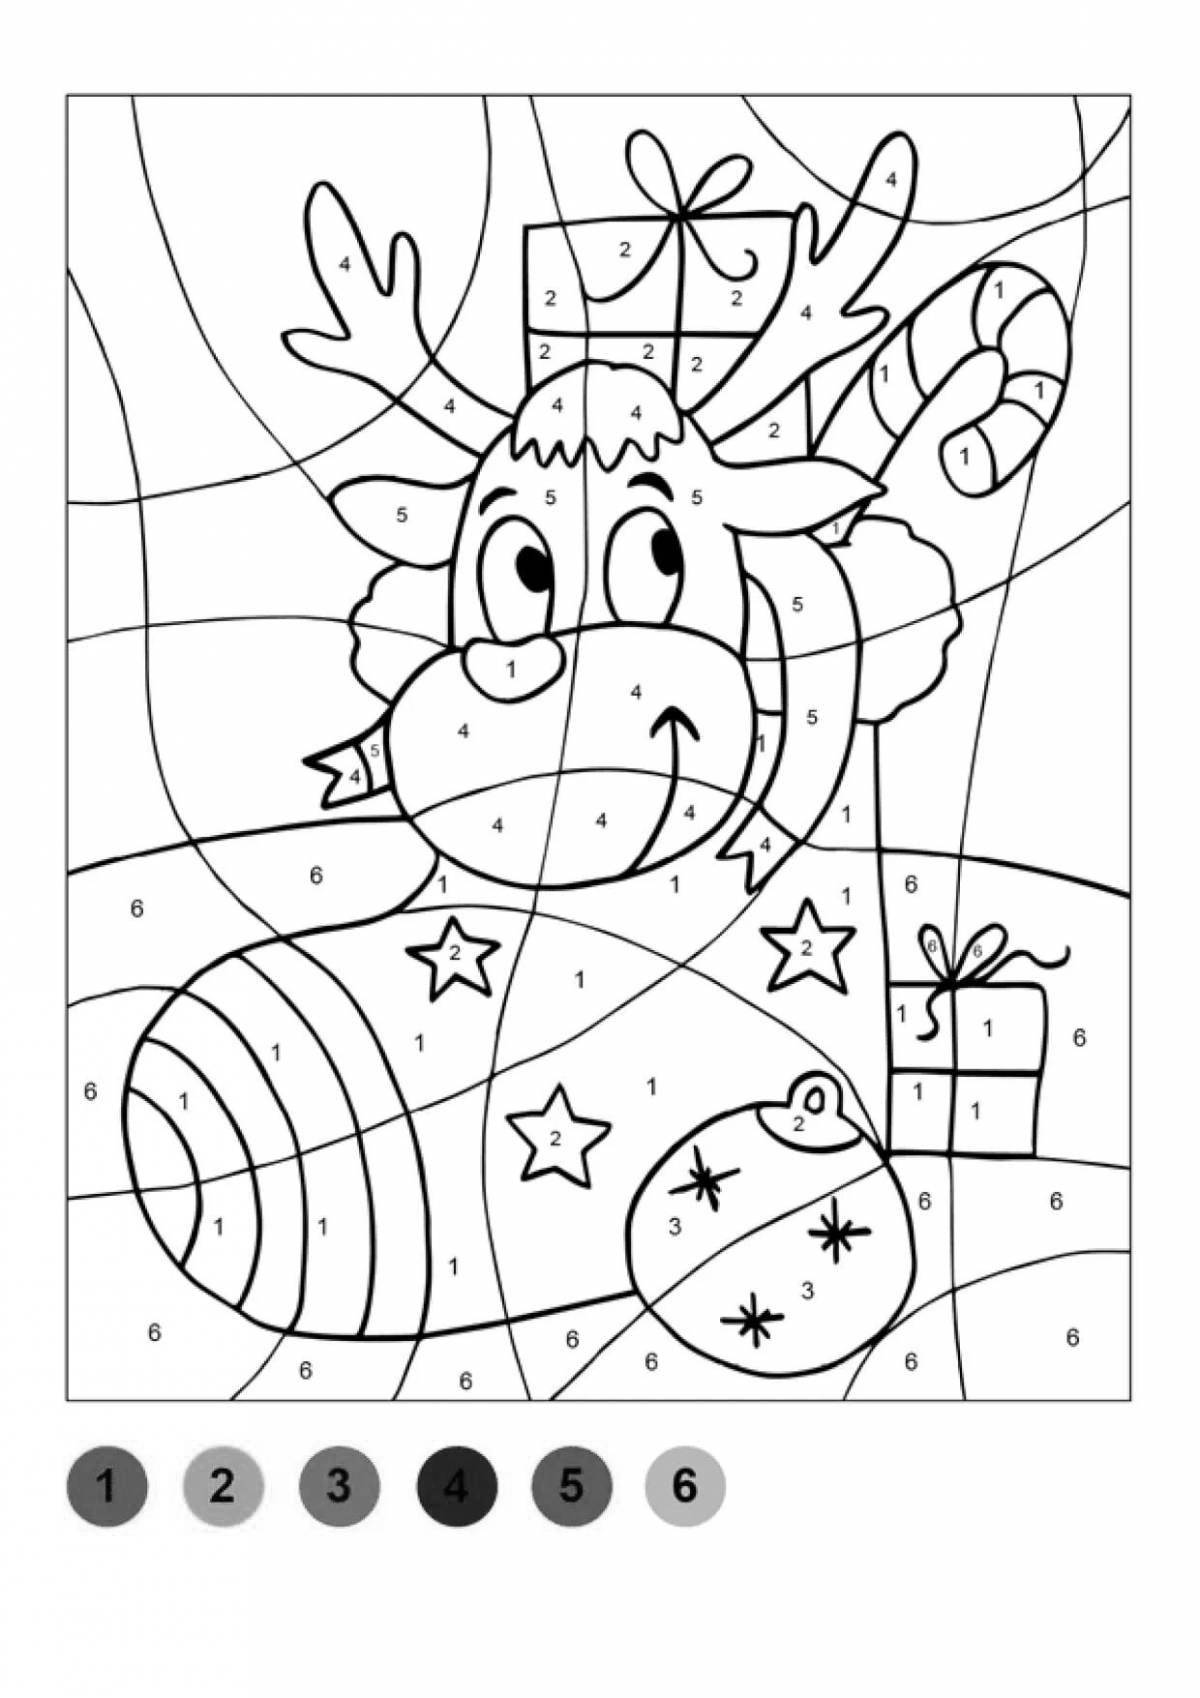 Radiant coloring by numbers winter for kids